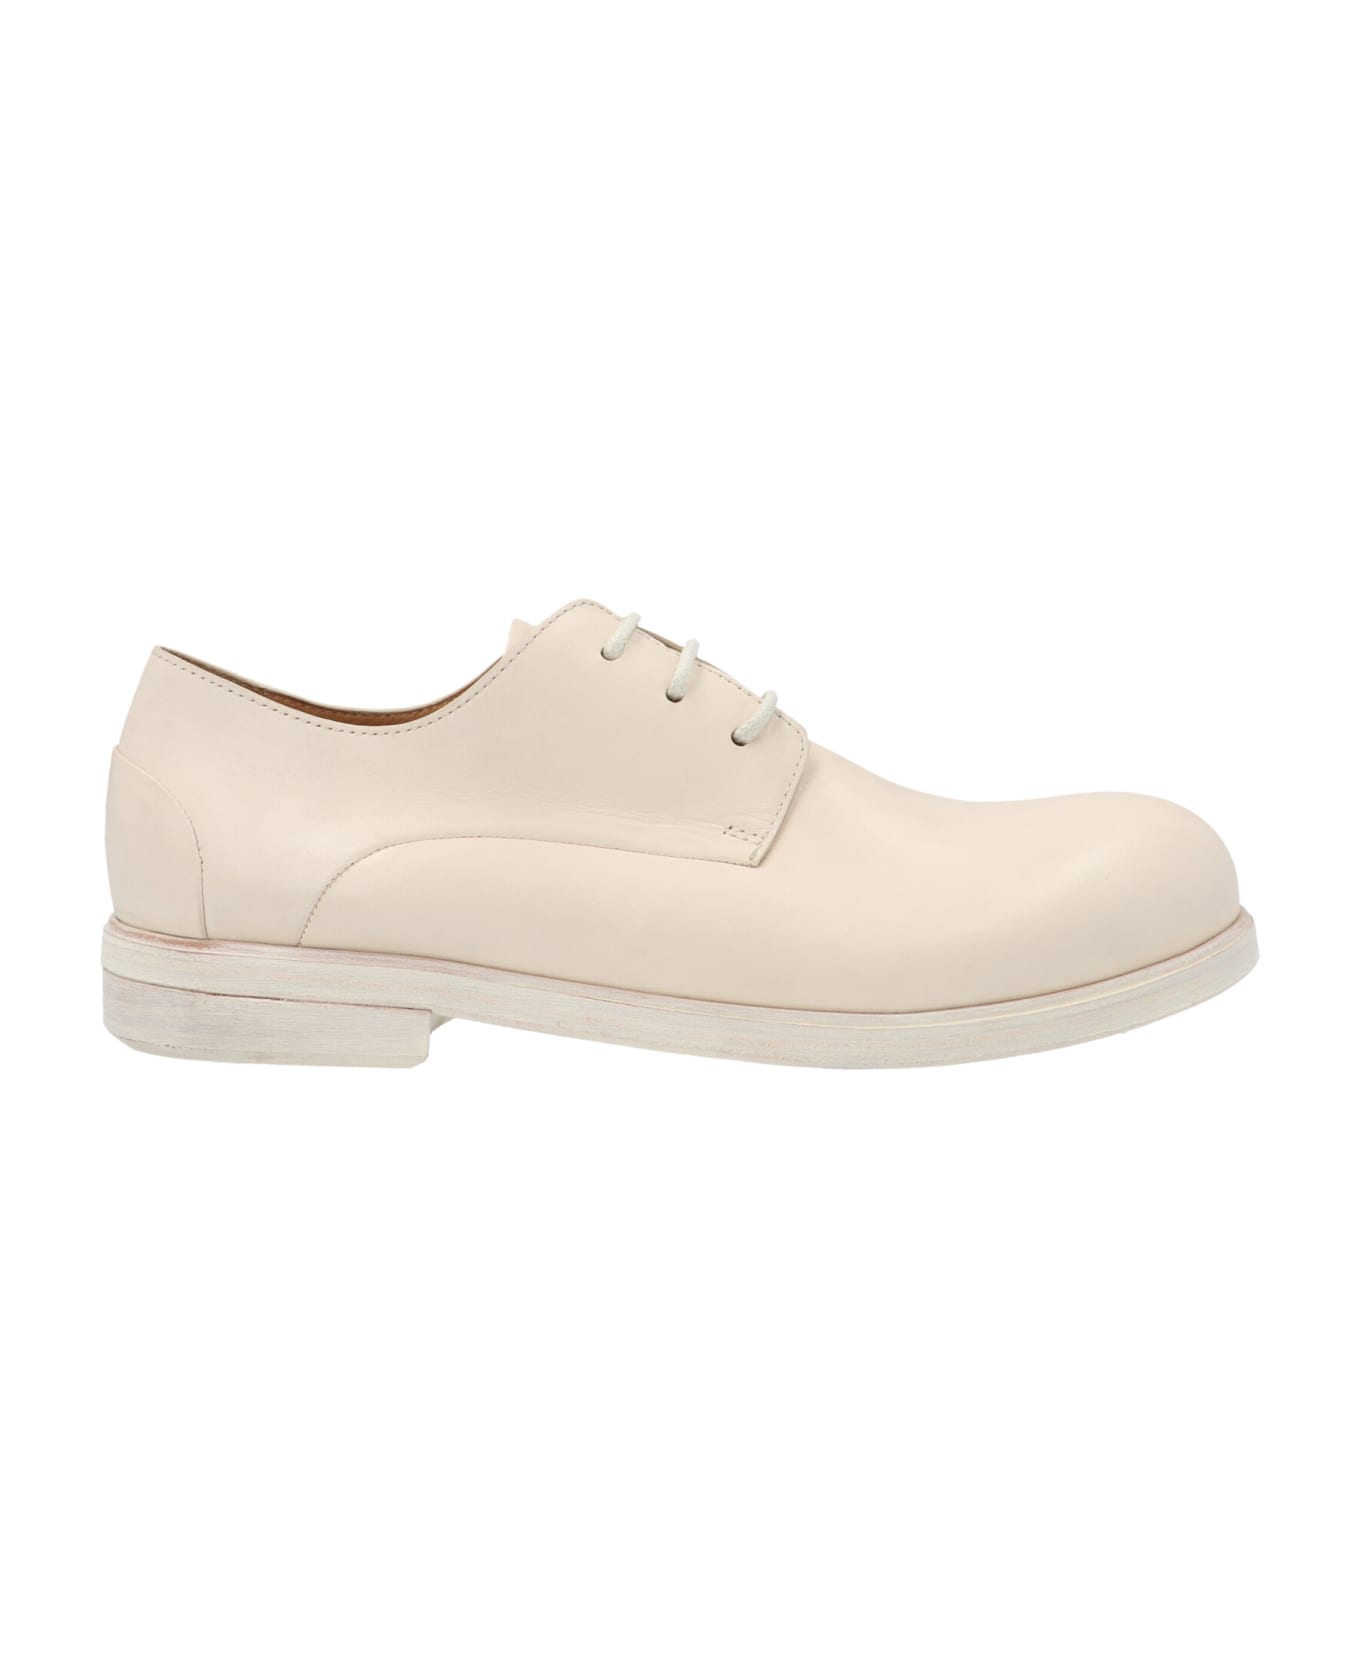 Marsell Zucca Media' Derby Shoes - White